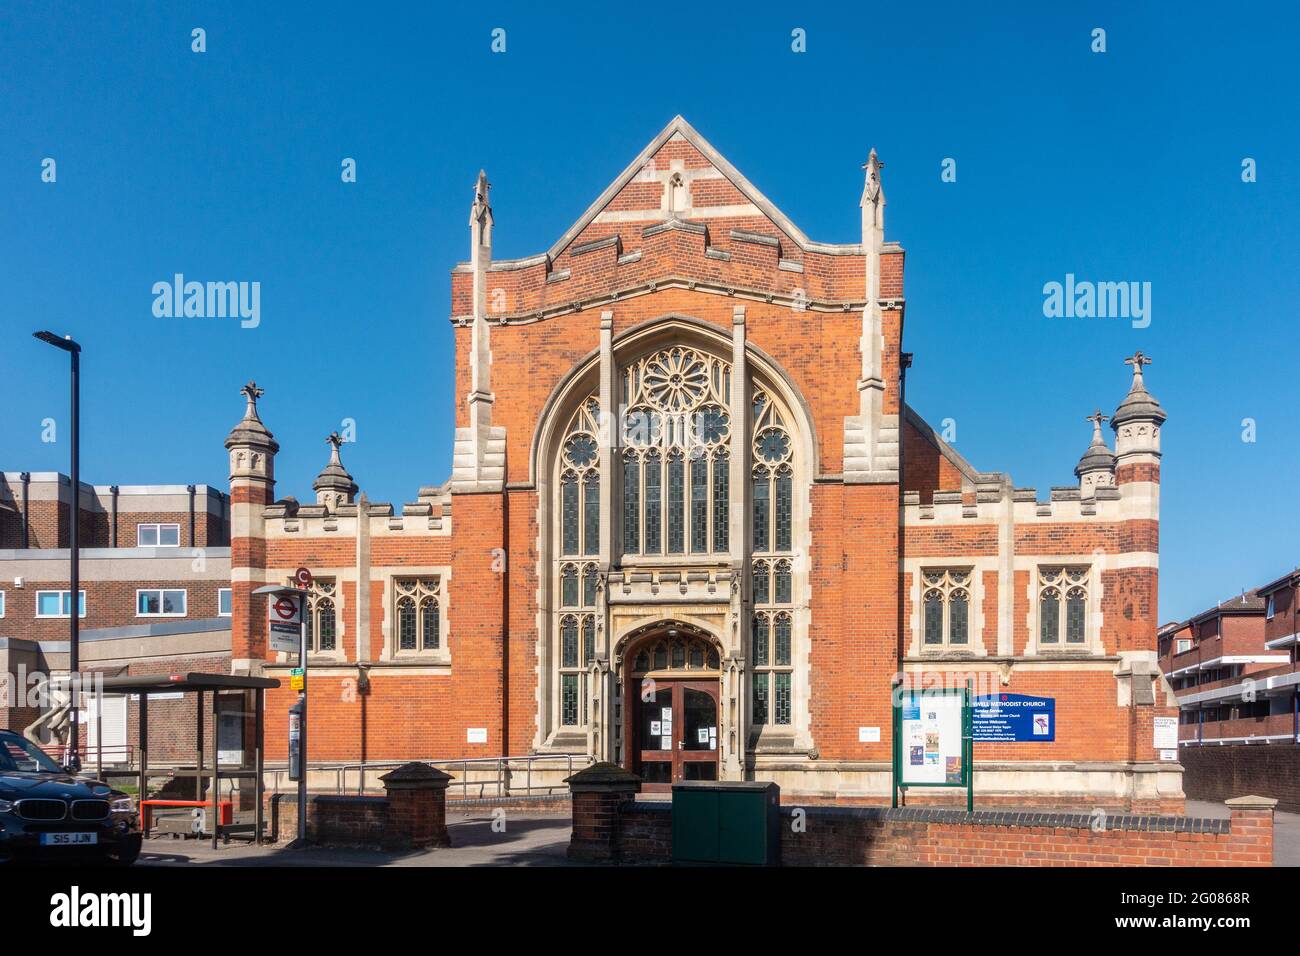 Hanwell Methodist Church, a red brick building and place or worship in Hanwell, London, UK Stock Photo